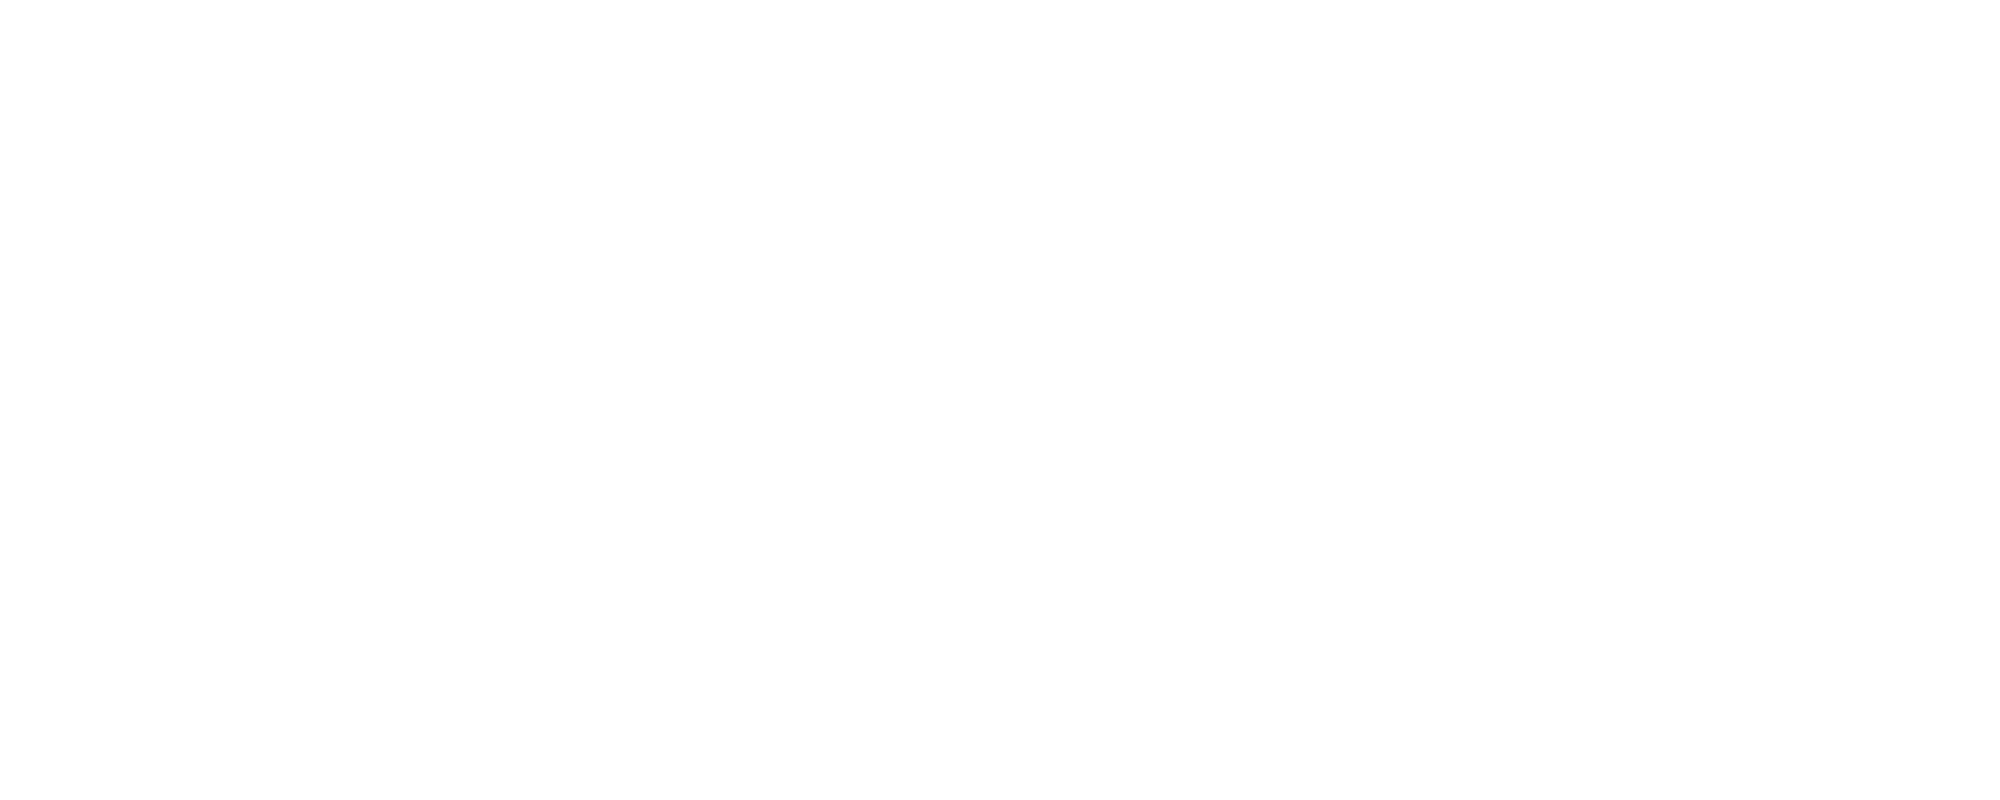 PHOENIX RECOGNIZED BY OVATION TV FOR ITS STAND FOR THE ARTS INITIATIVE